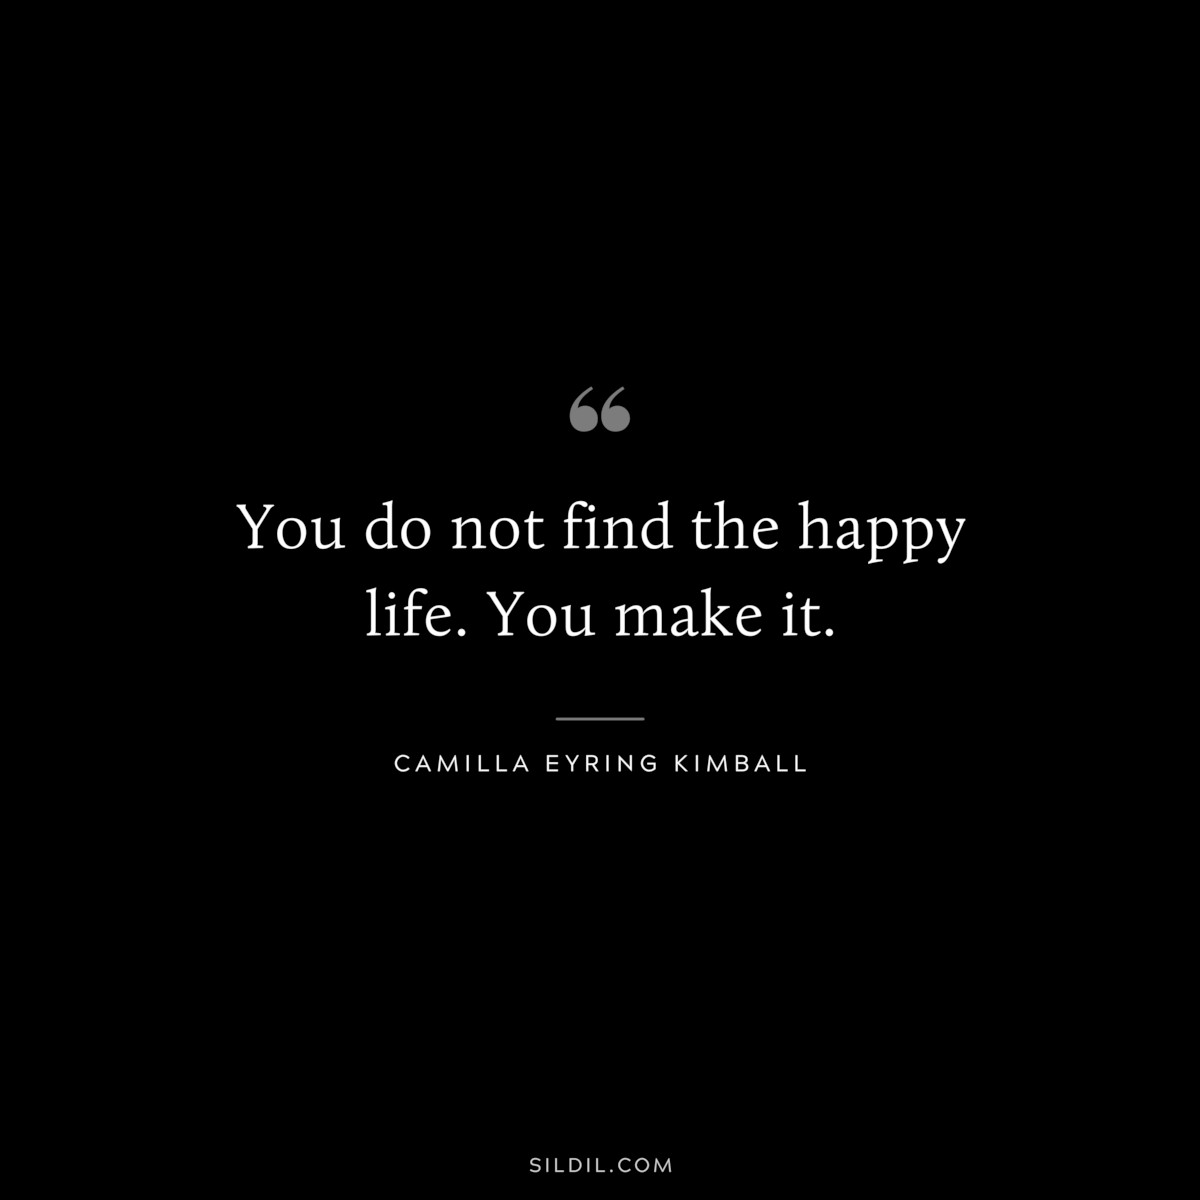 You do not find the happy life. You make it. ― Camilla Eyring Kimball